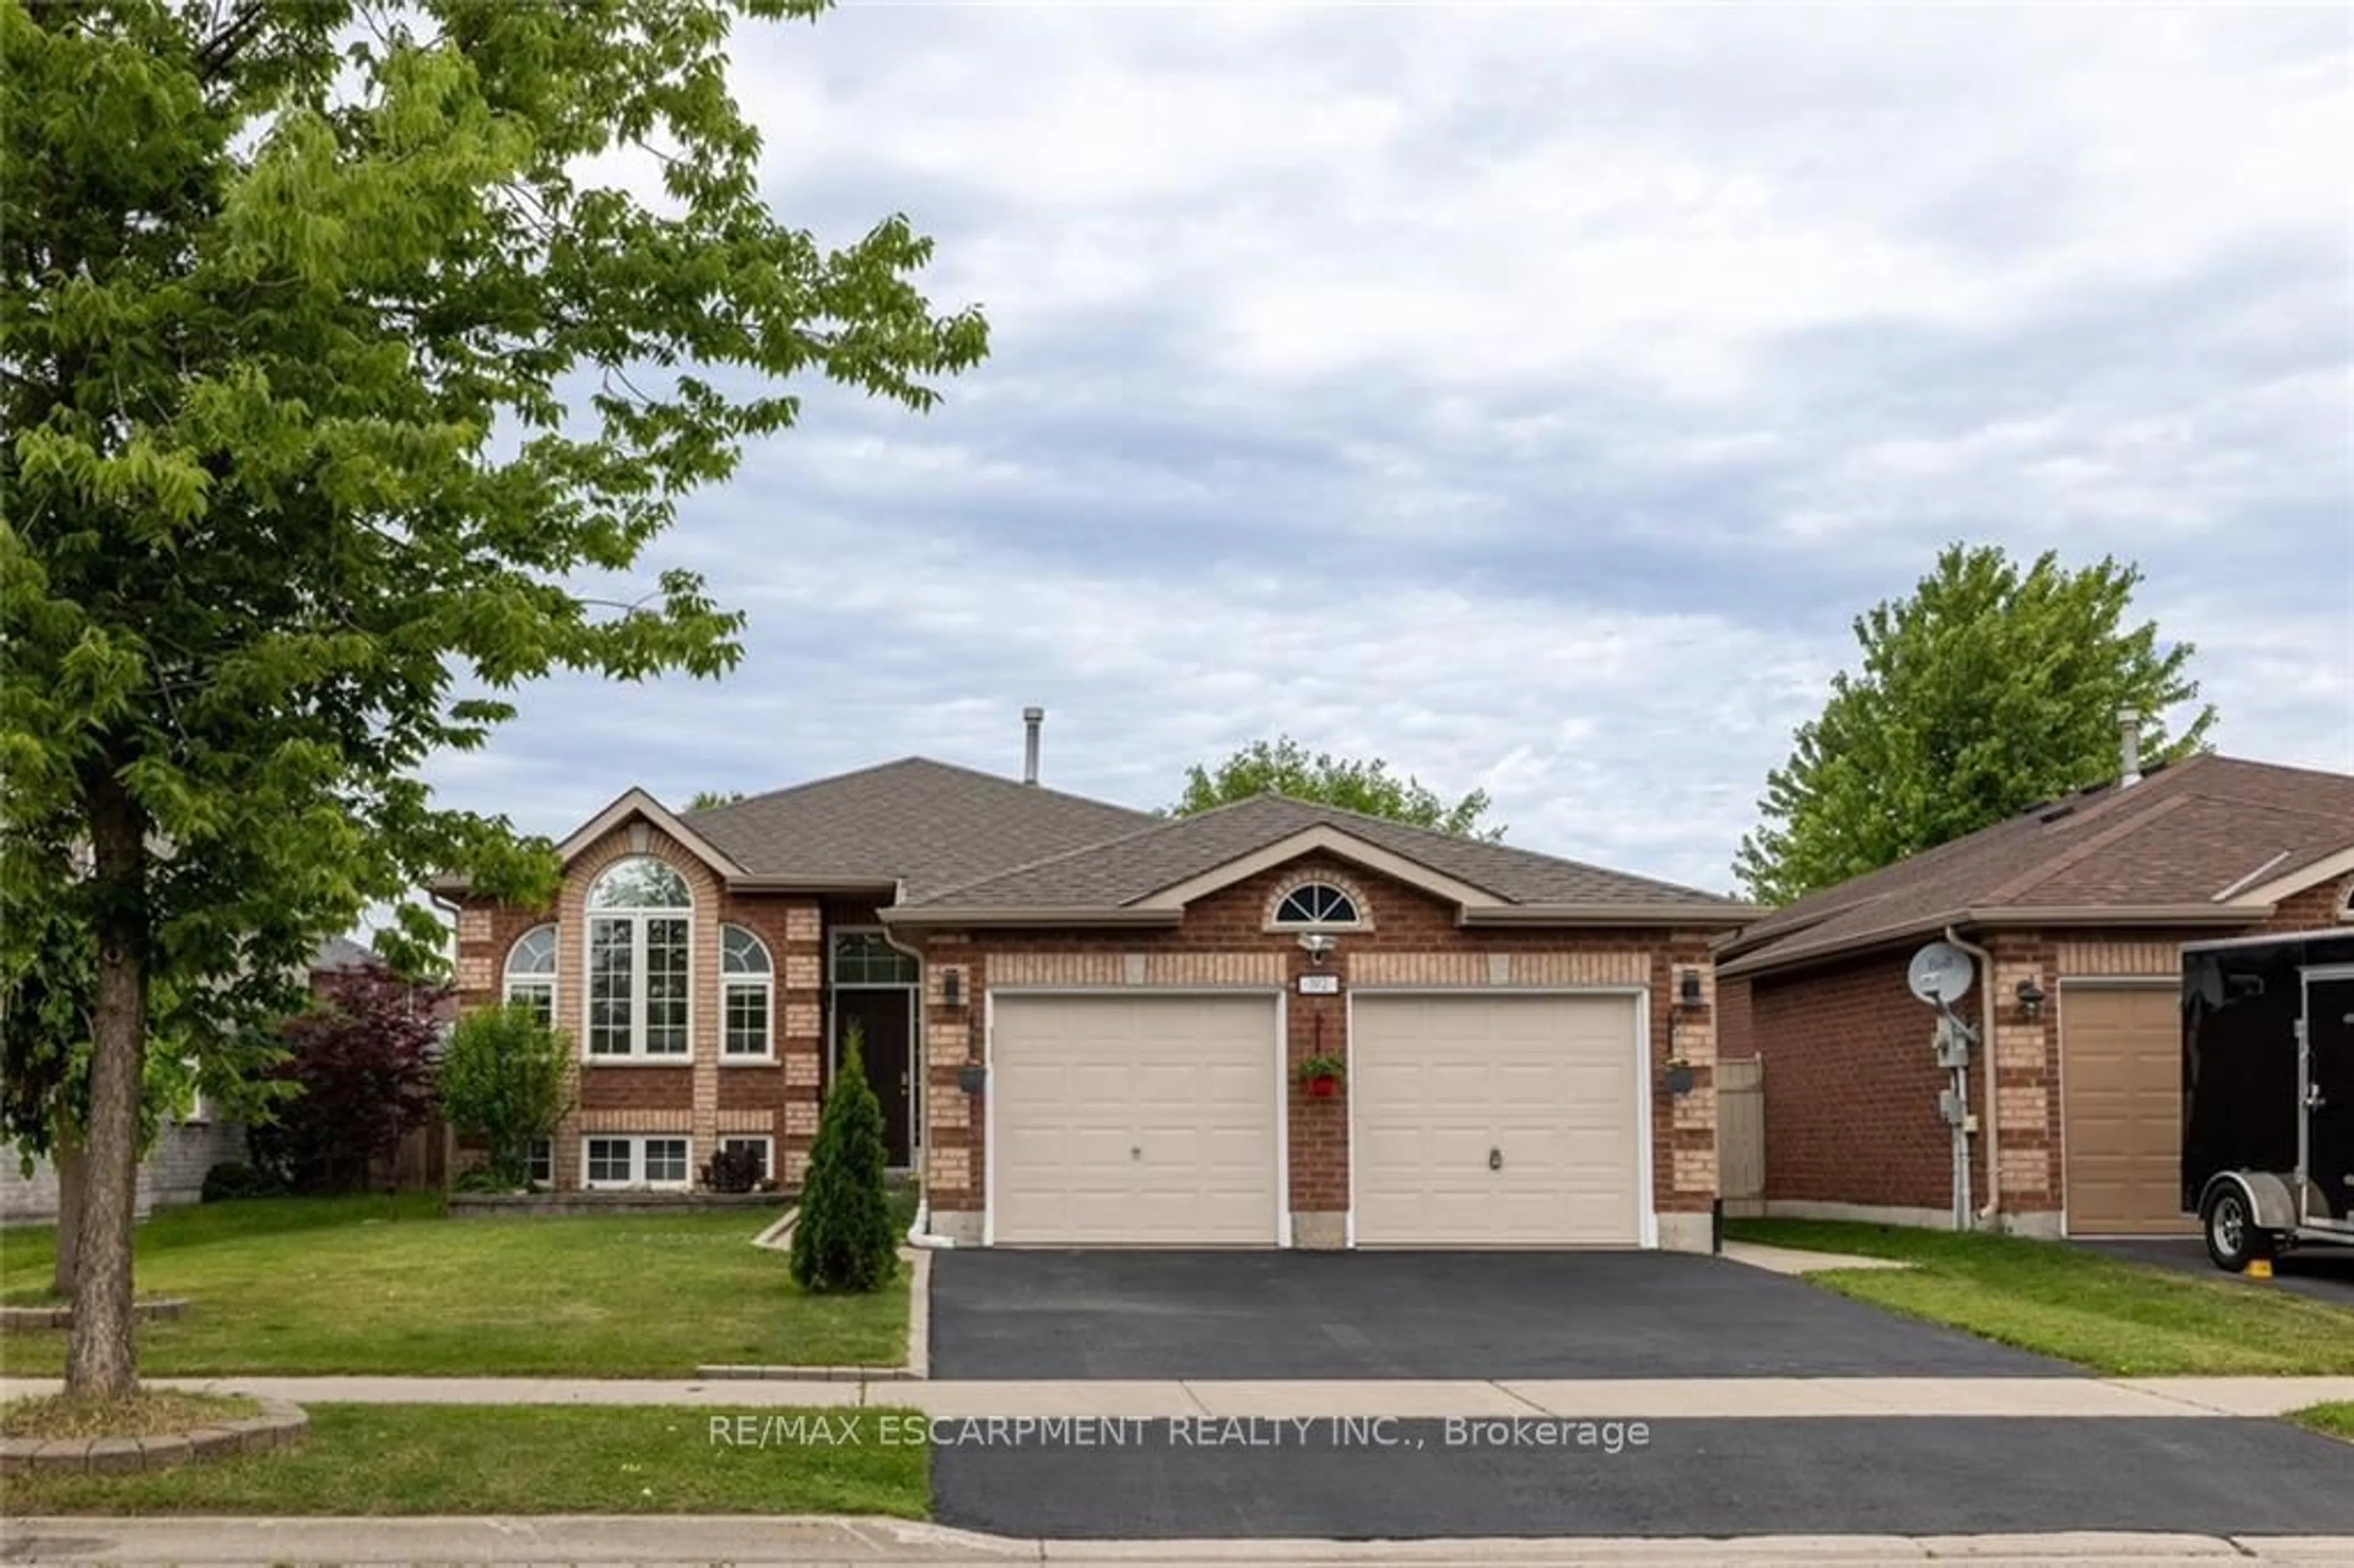 Home with brick exterior material for 192 Sproule Dr, Barrie Ontario L4N 0P9